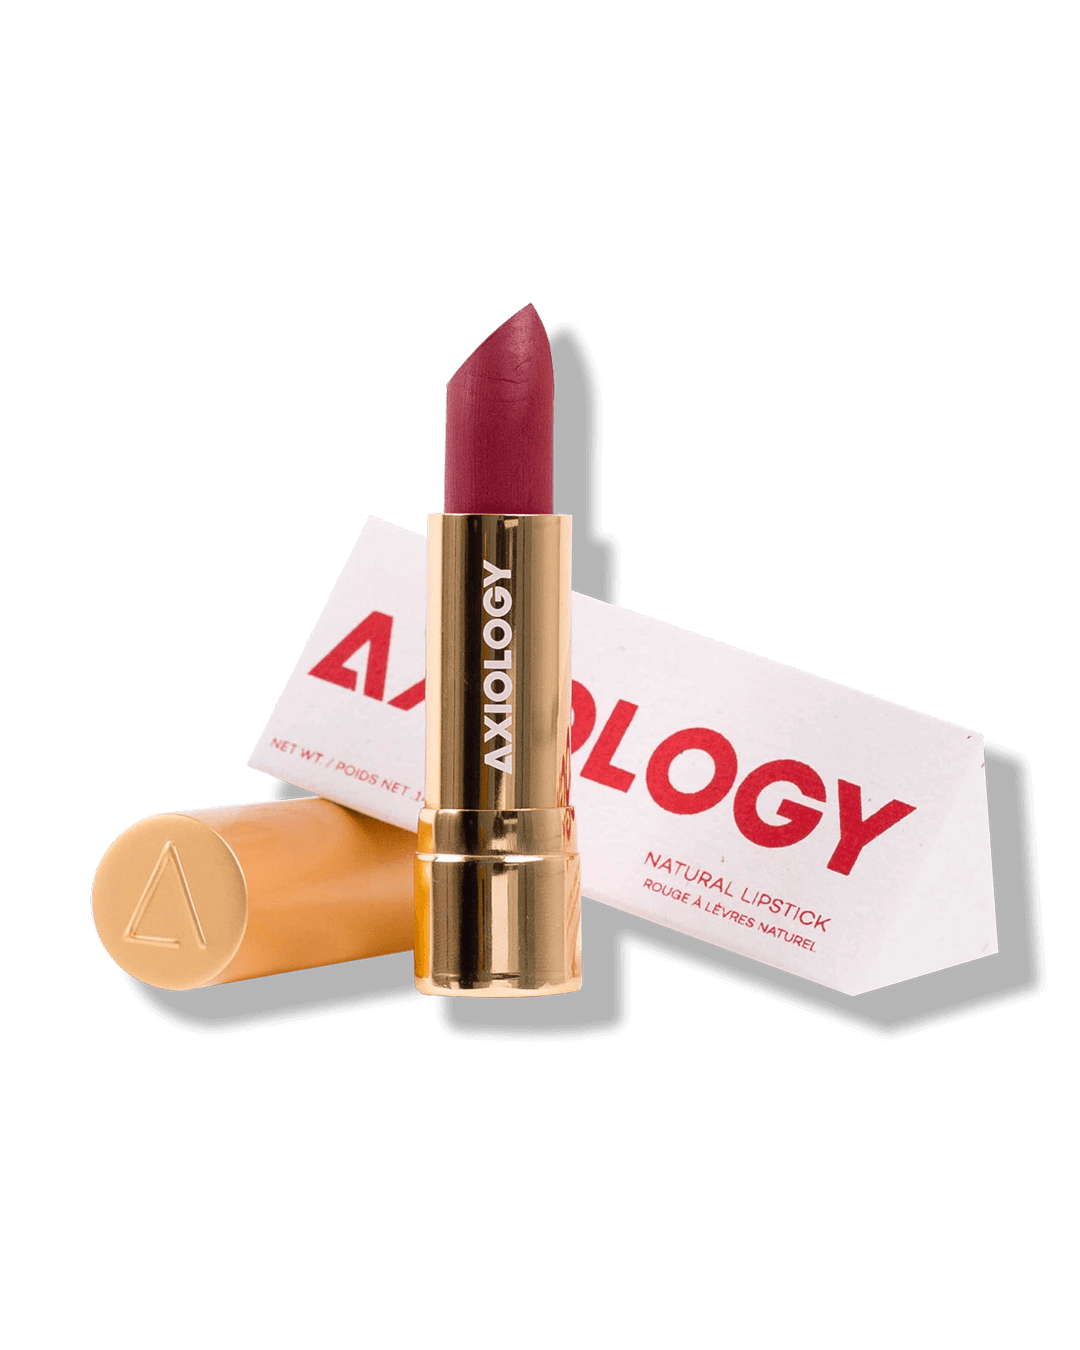 The Bullet Lipstick Clarity